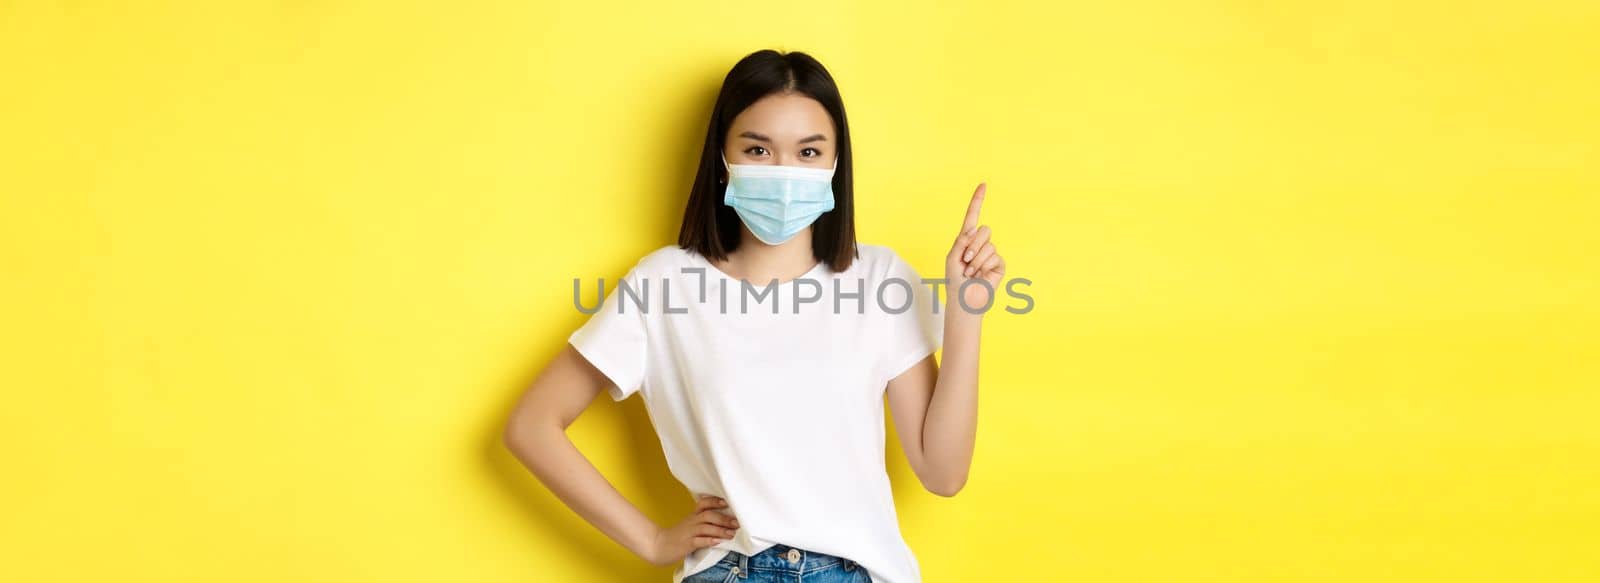 Covid, health care and pandemic concept. Asian female model in medical mask and white t-shirt pointing finger at upper left corner logo, showing promotion, yellow background.